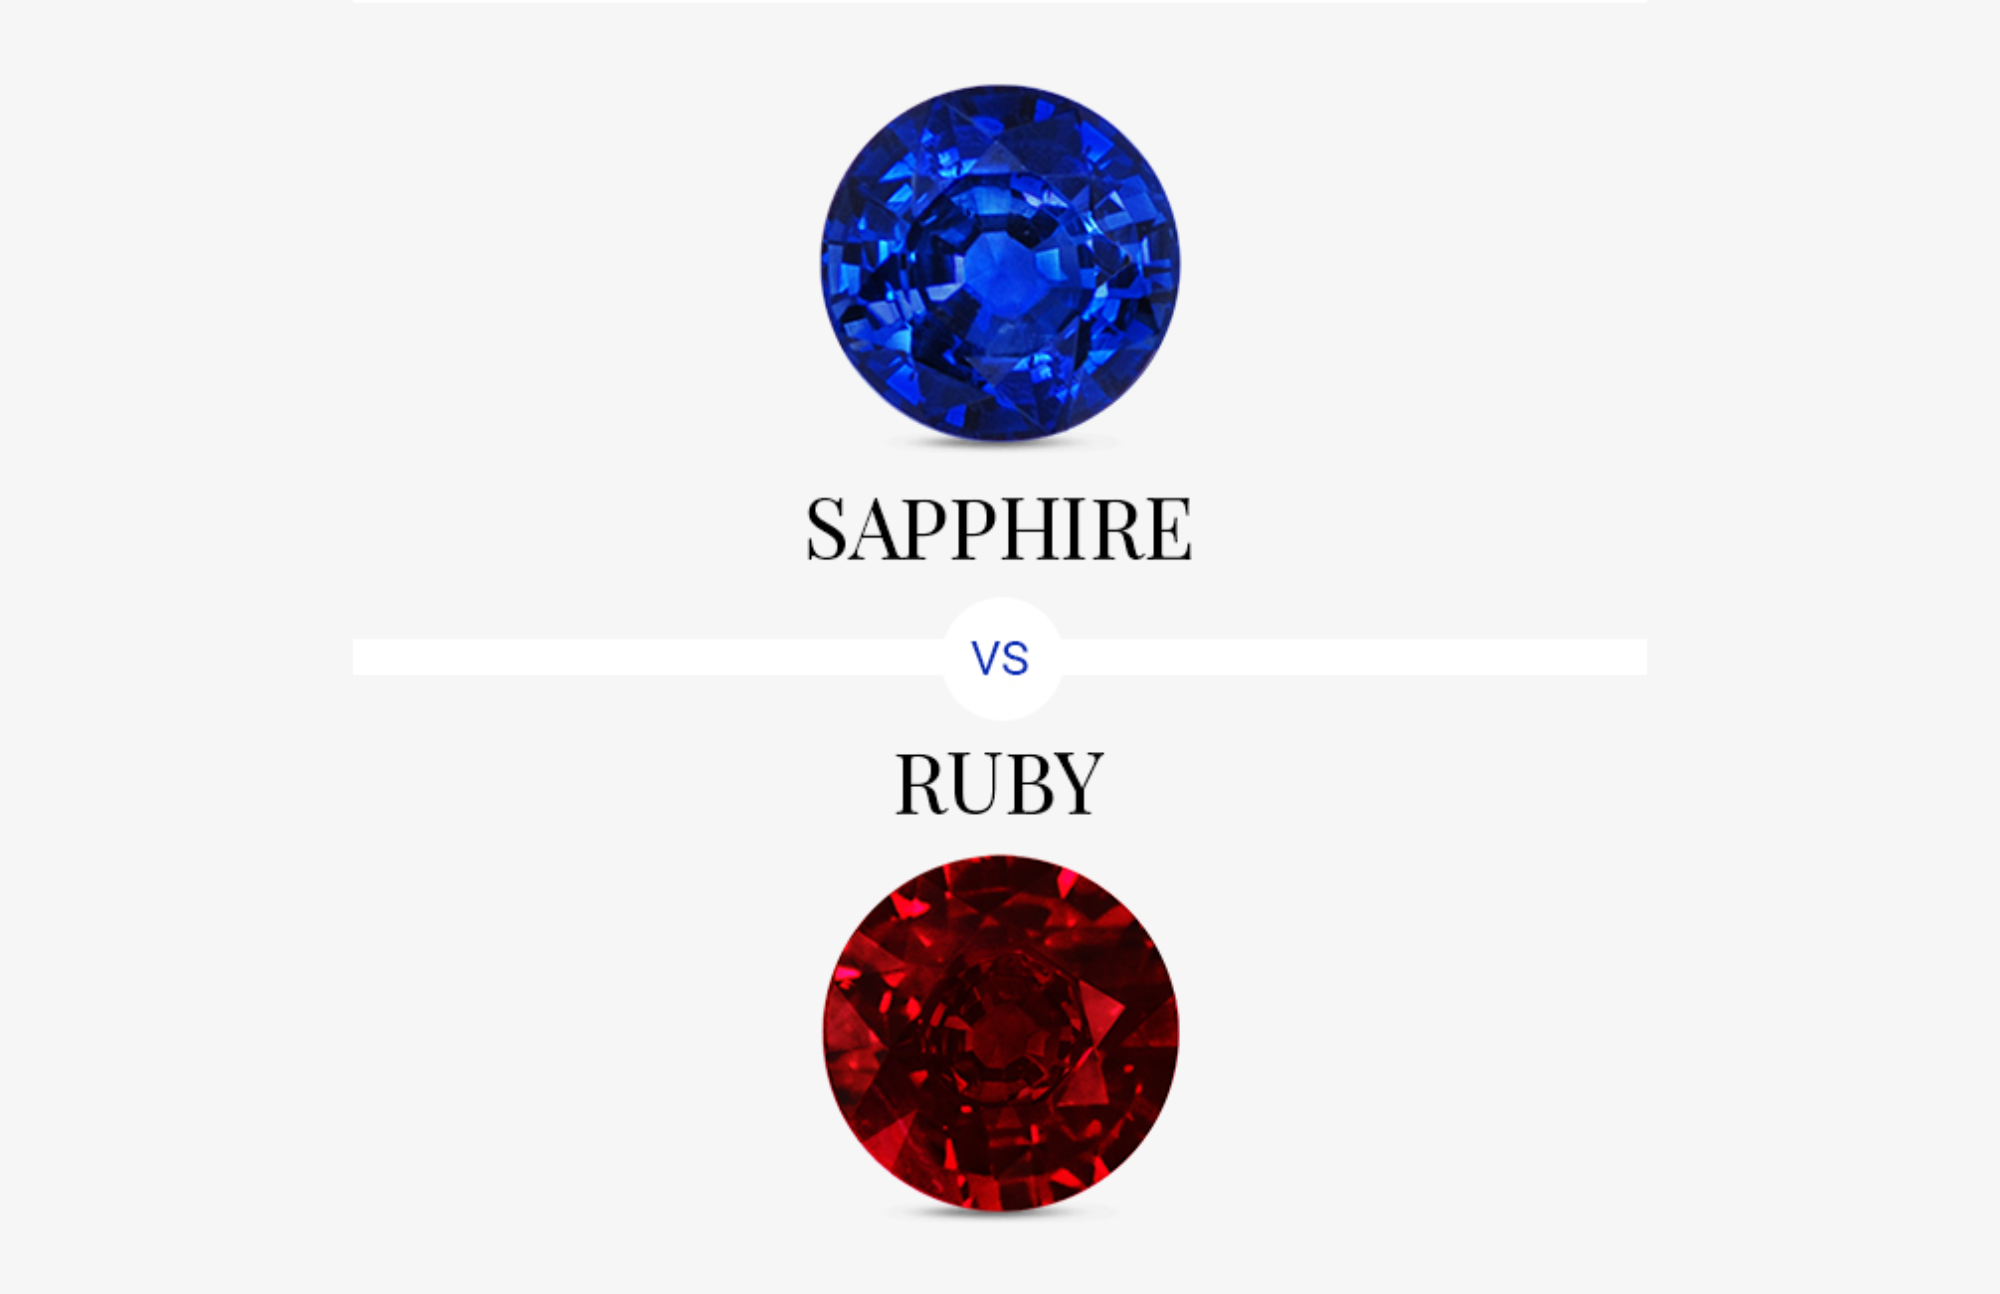 The blue sapphire and red ruby stone